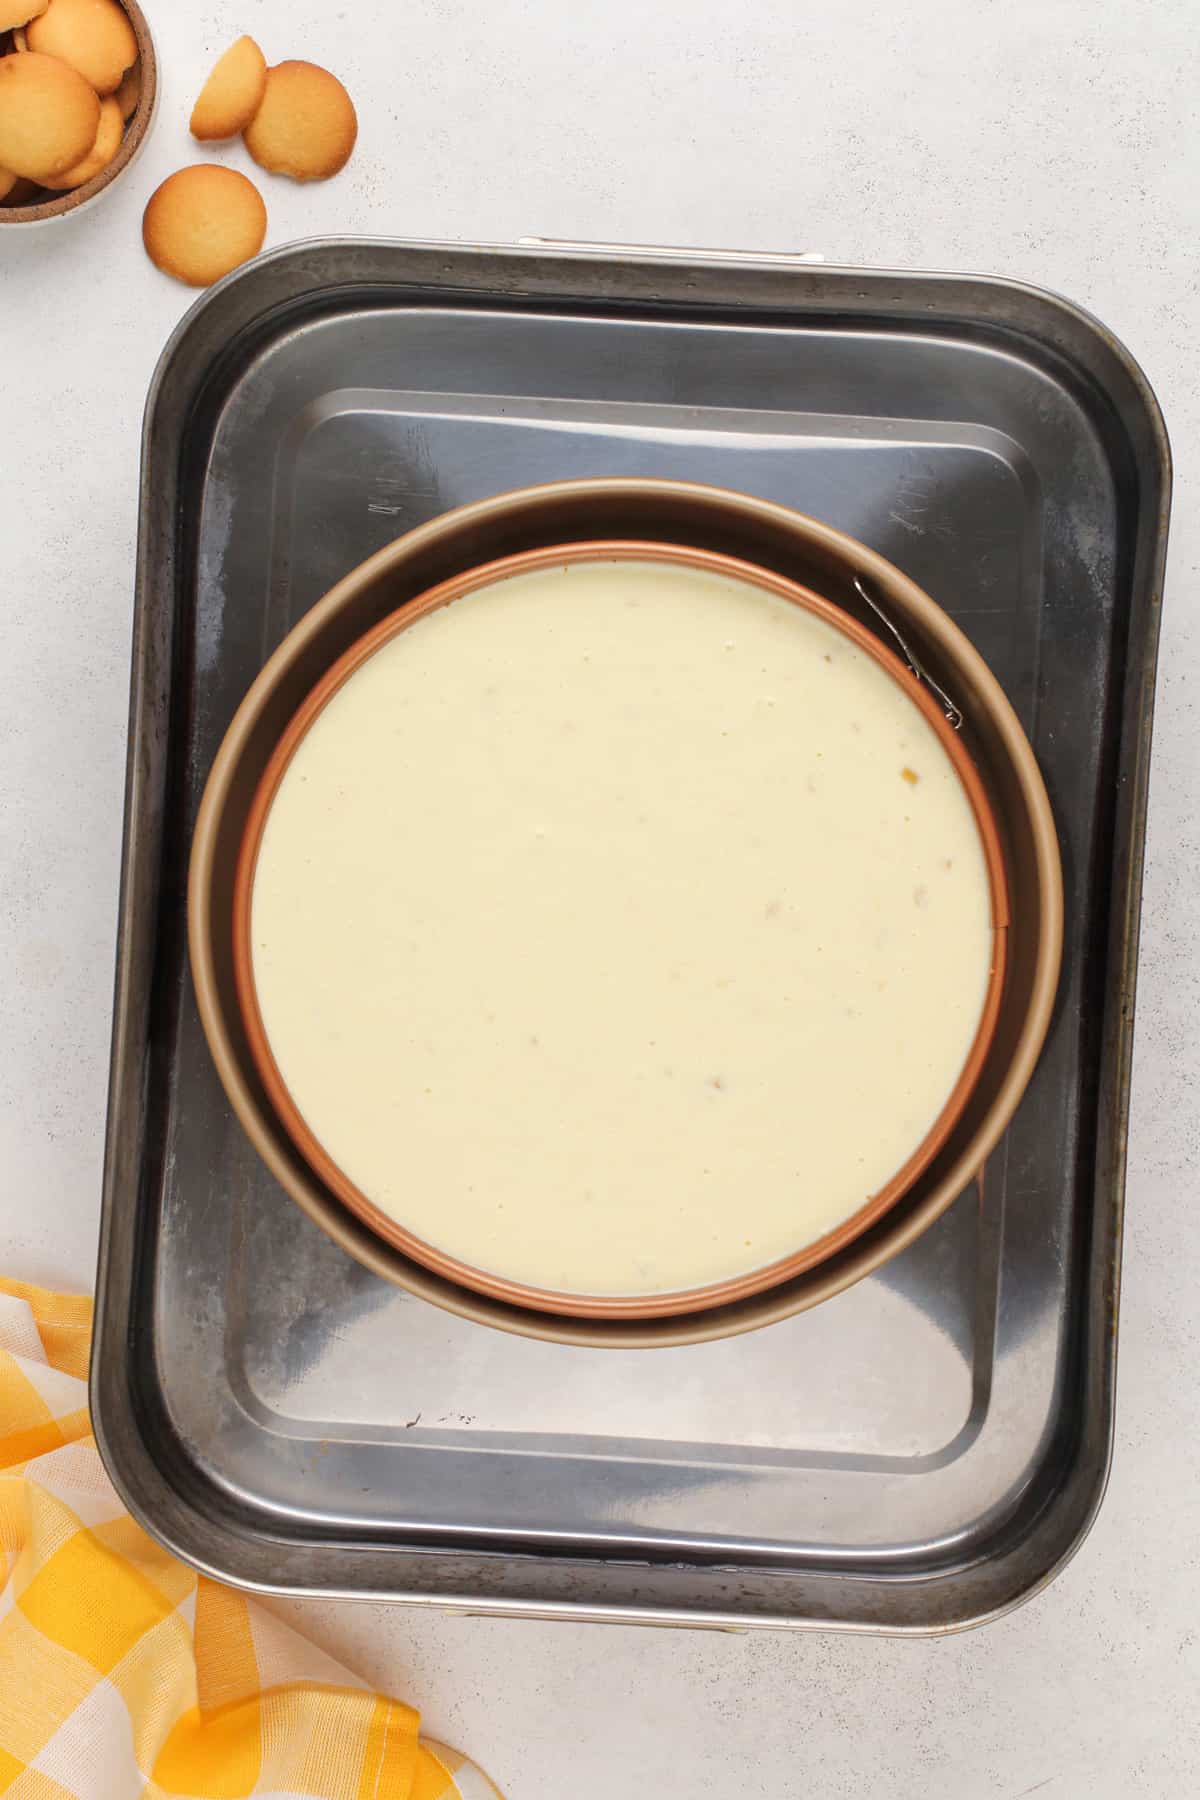 Unbaked banana pudding cheesecake in a water bath in a roasting pan, ready to go in the oven.